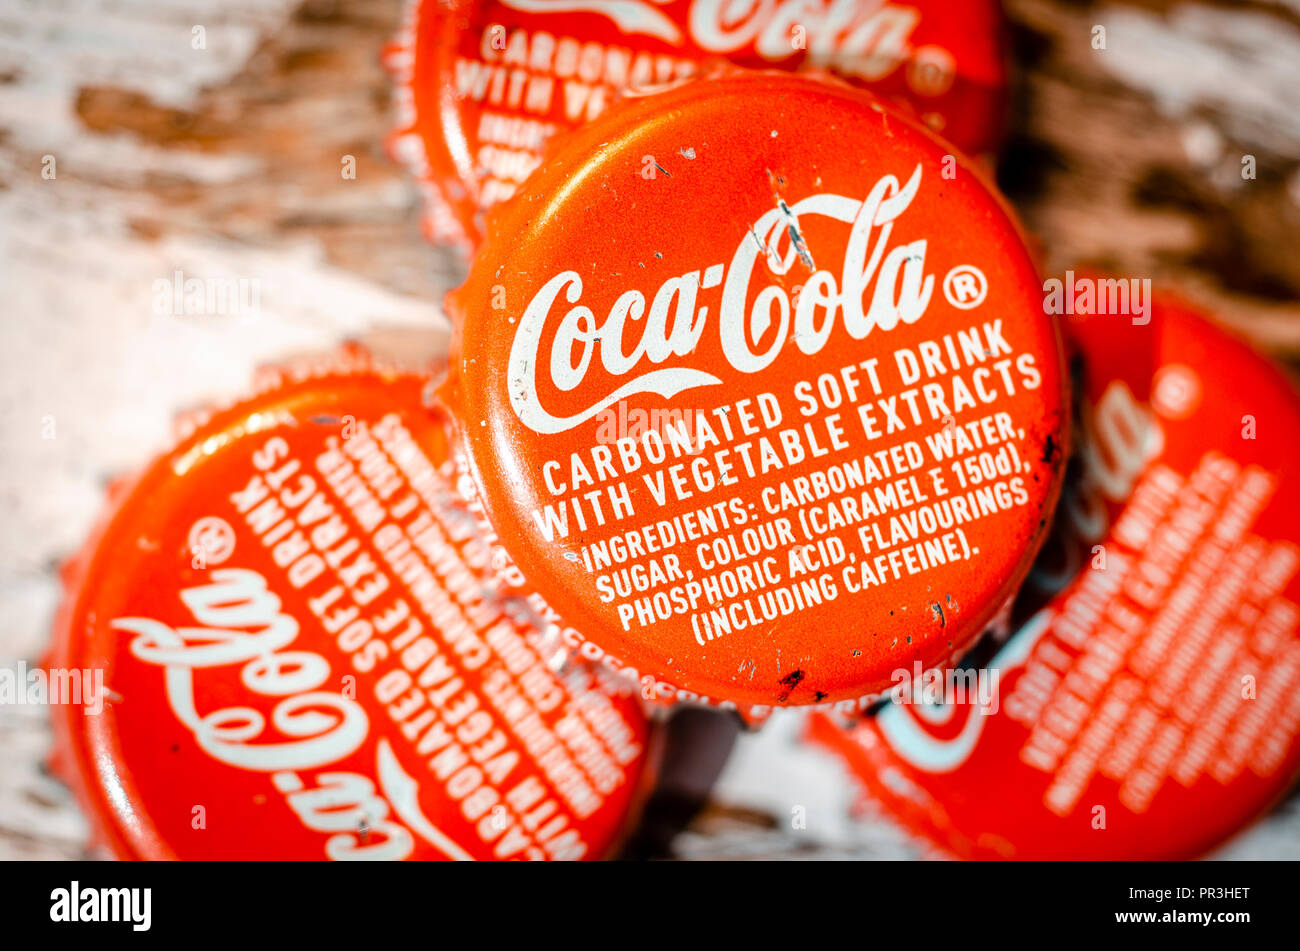 Coca-Cola Bottle Tops, Coca-Cola  was first introduced in 1886 in the USA. Stock Photo